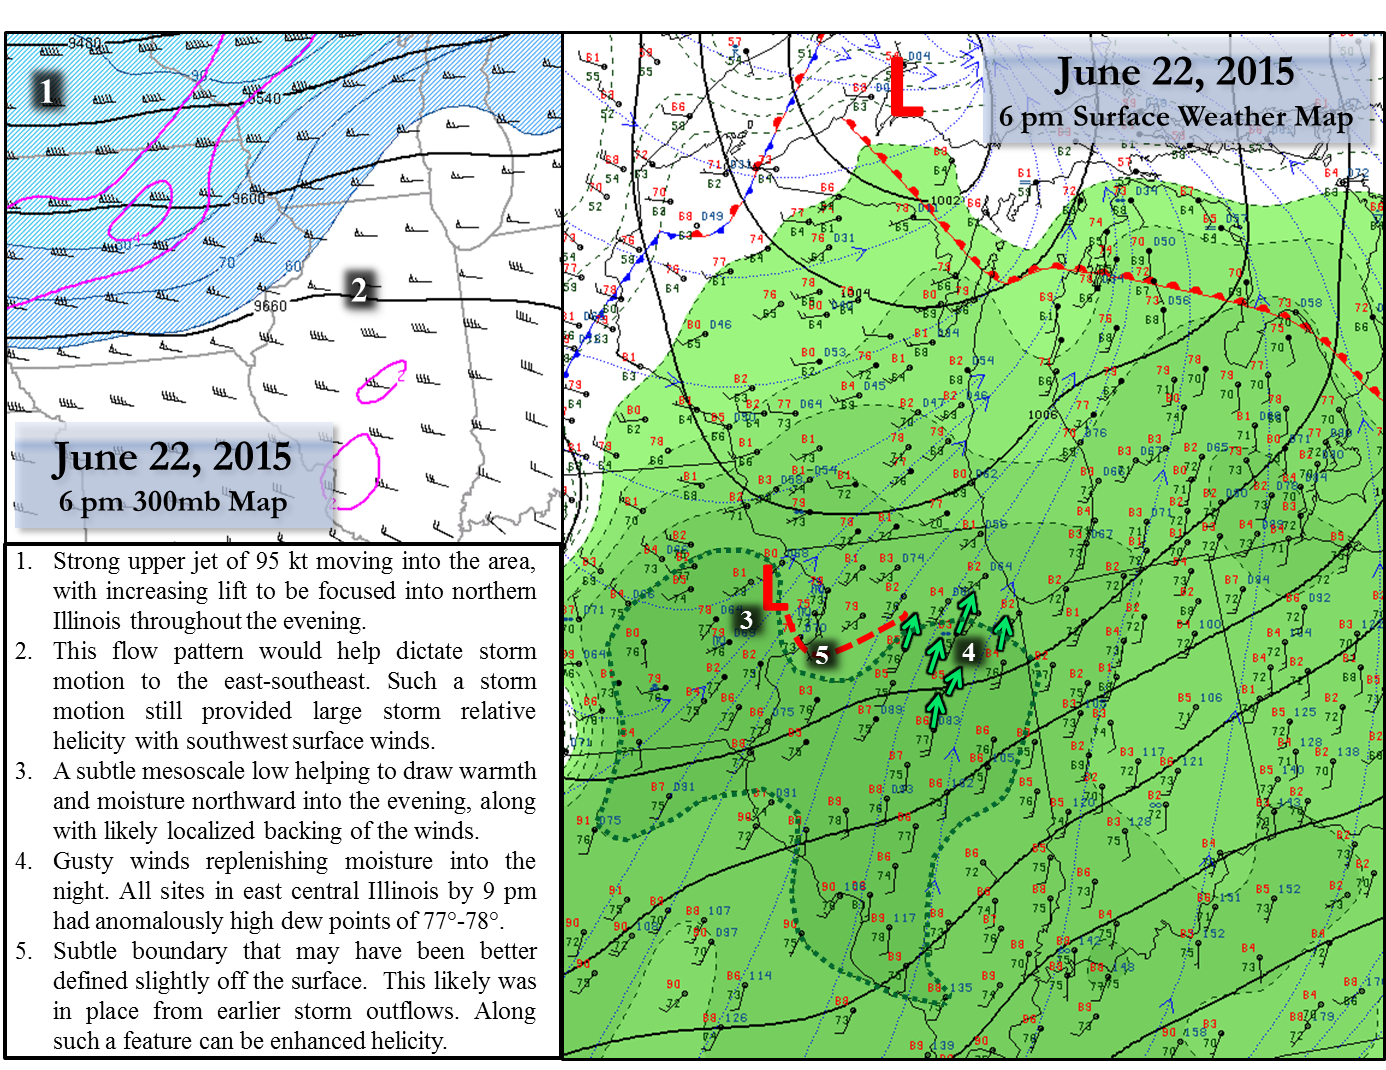 Map showing surface weather conditions and upper atmosphere conditions on June 22 2015 at 6:00 PM